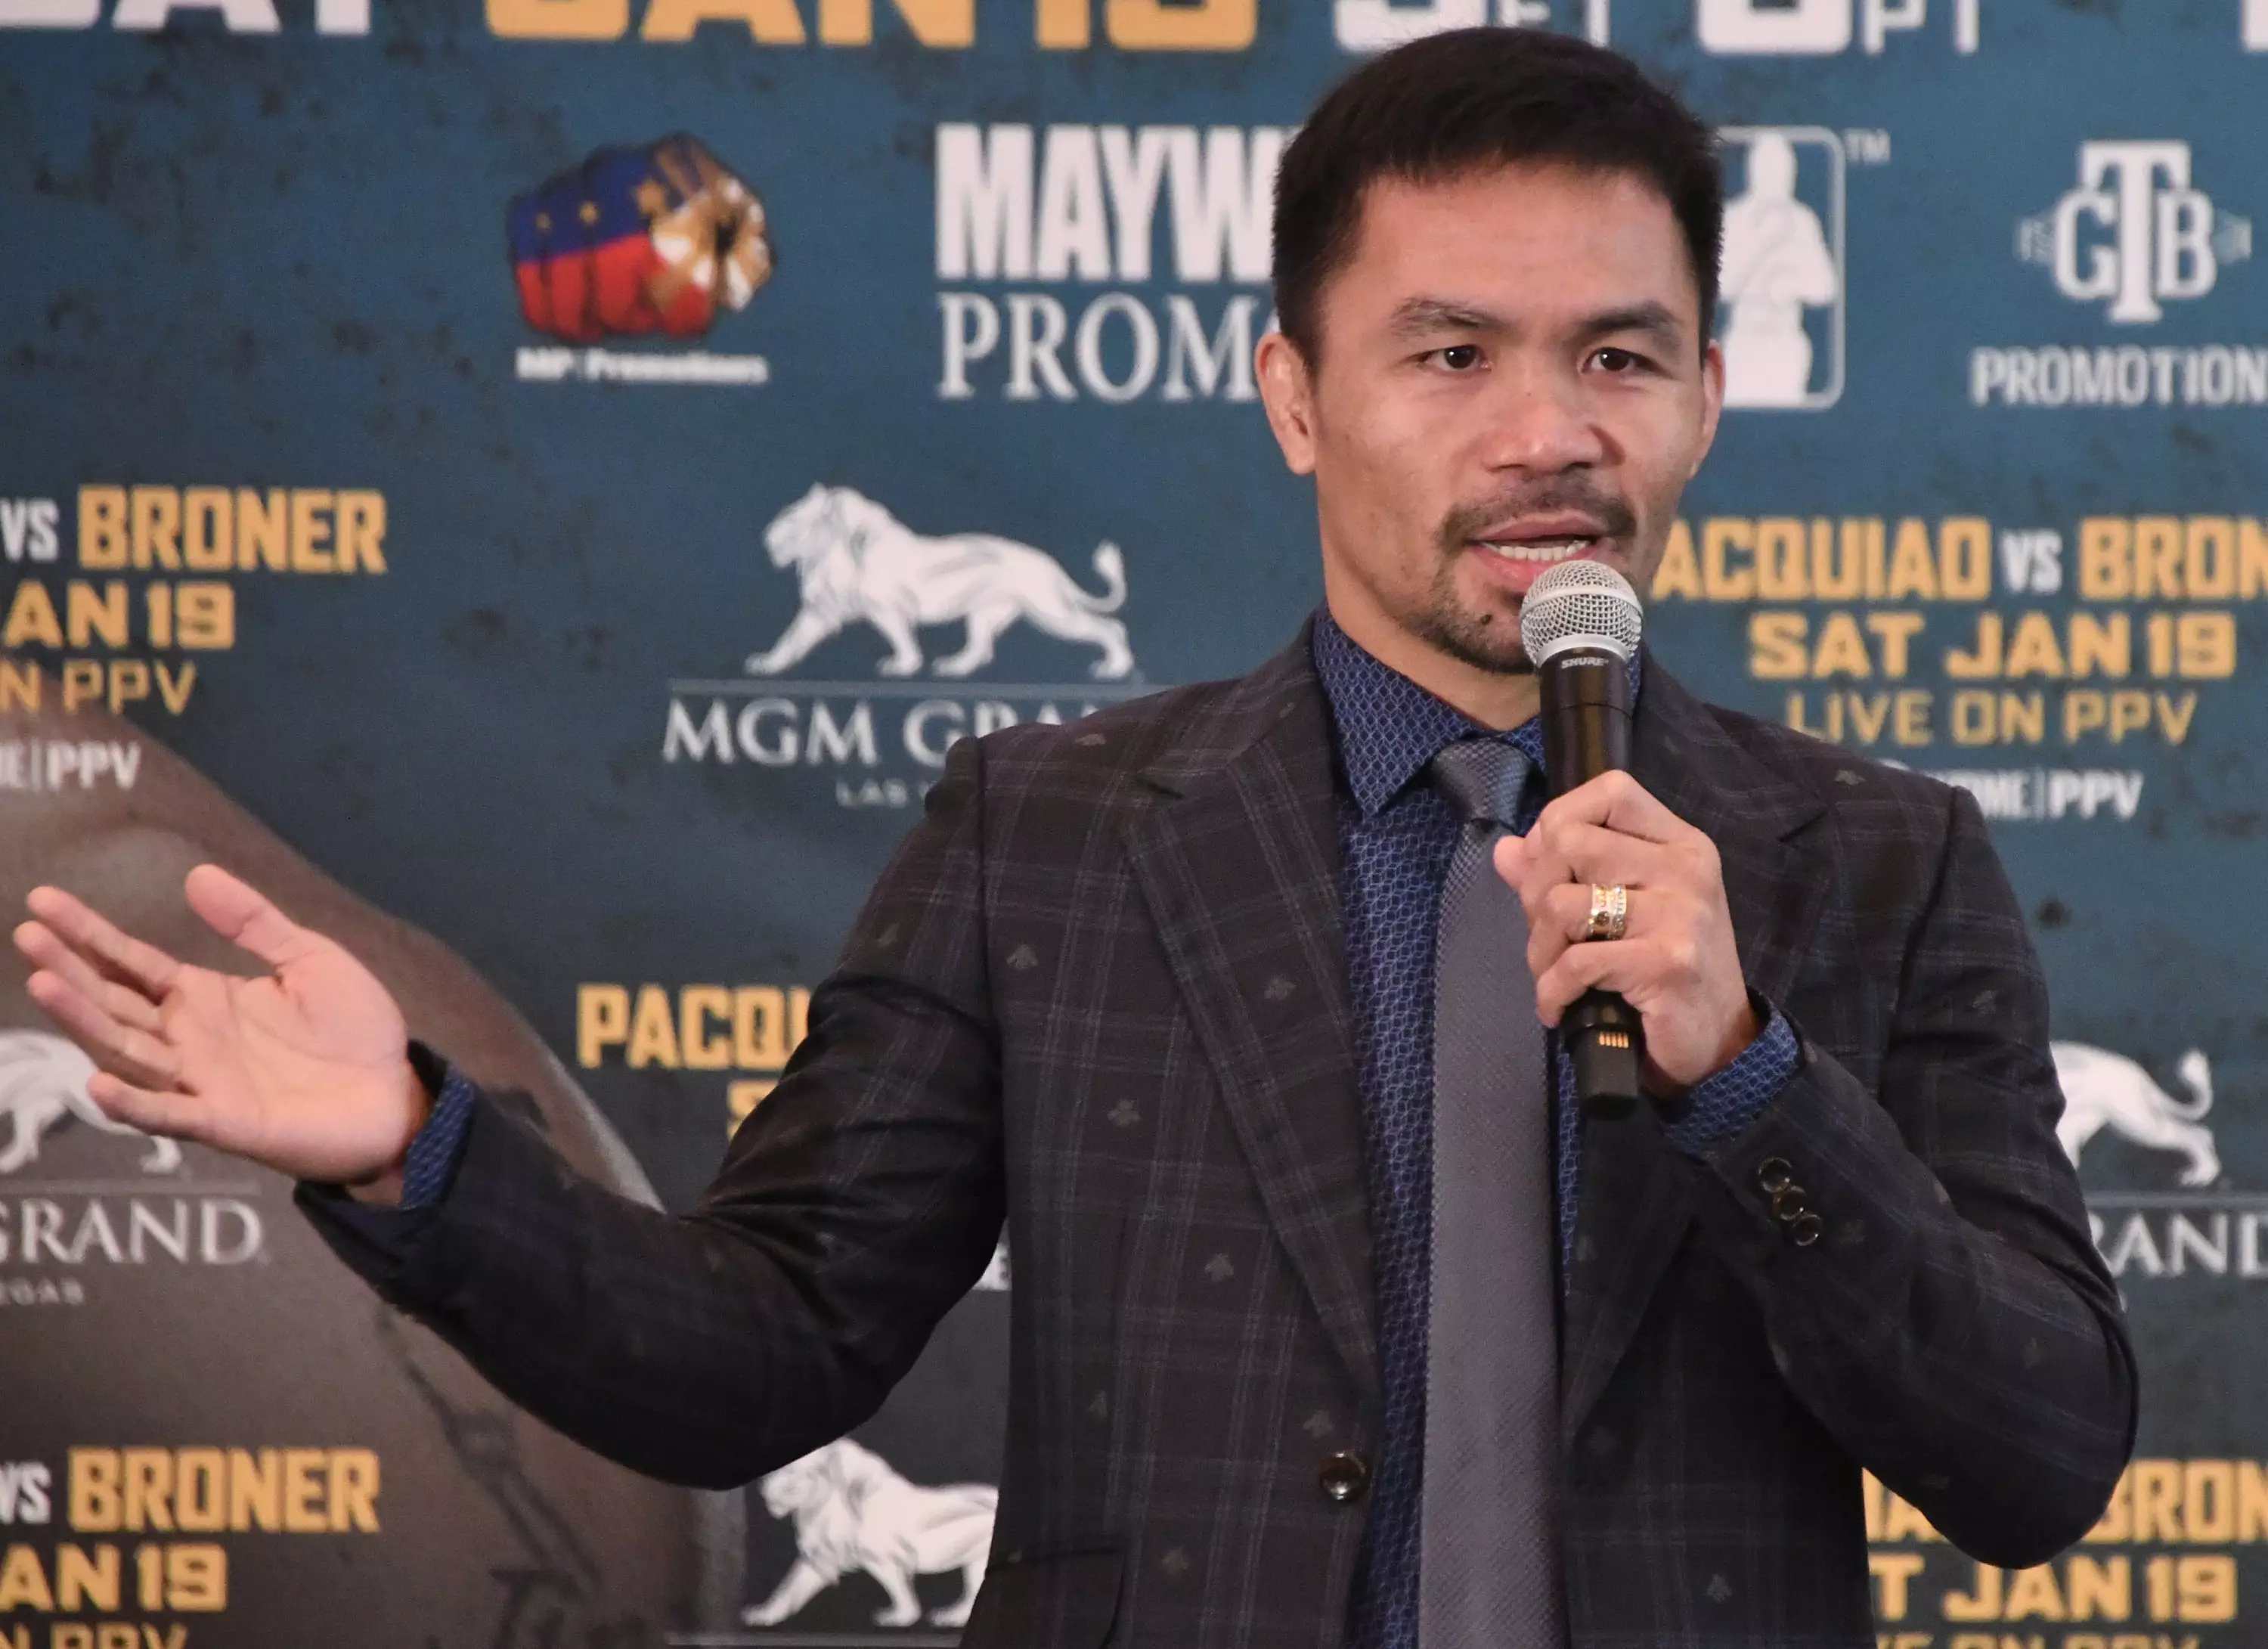 Manny Pacquiao says he's 'not afraid to die' serving his country during the coronavirus pandemic.